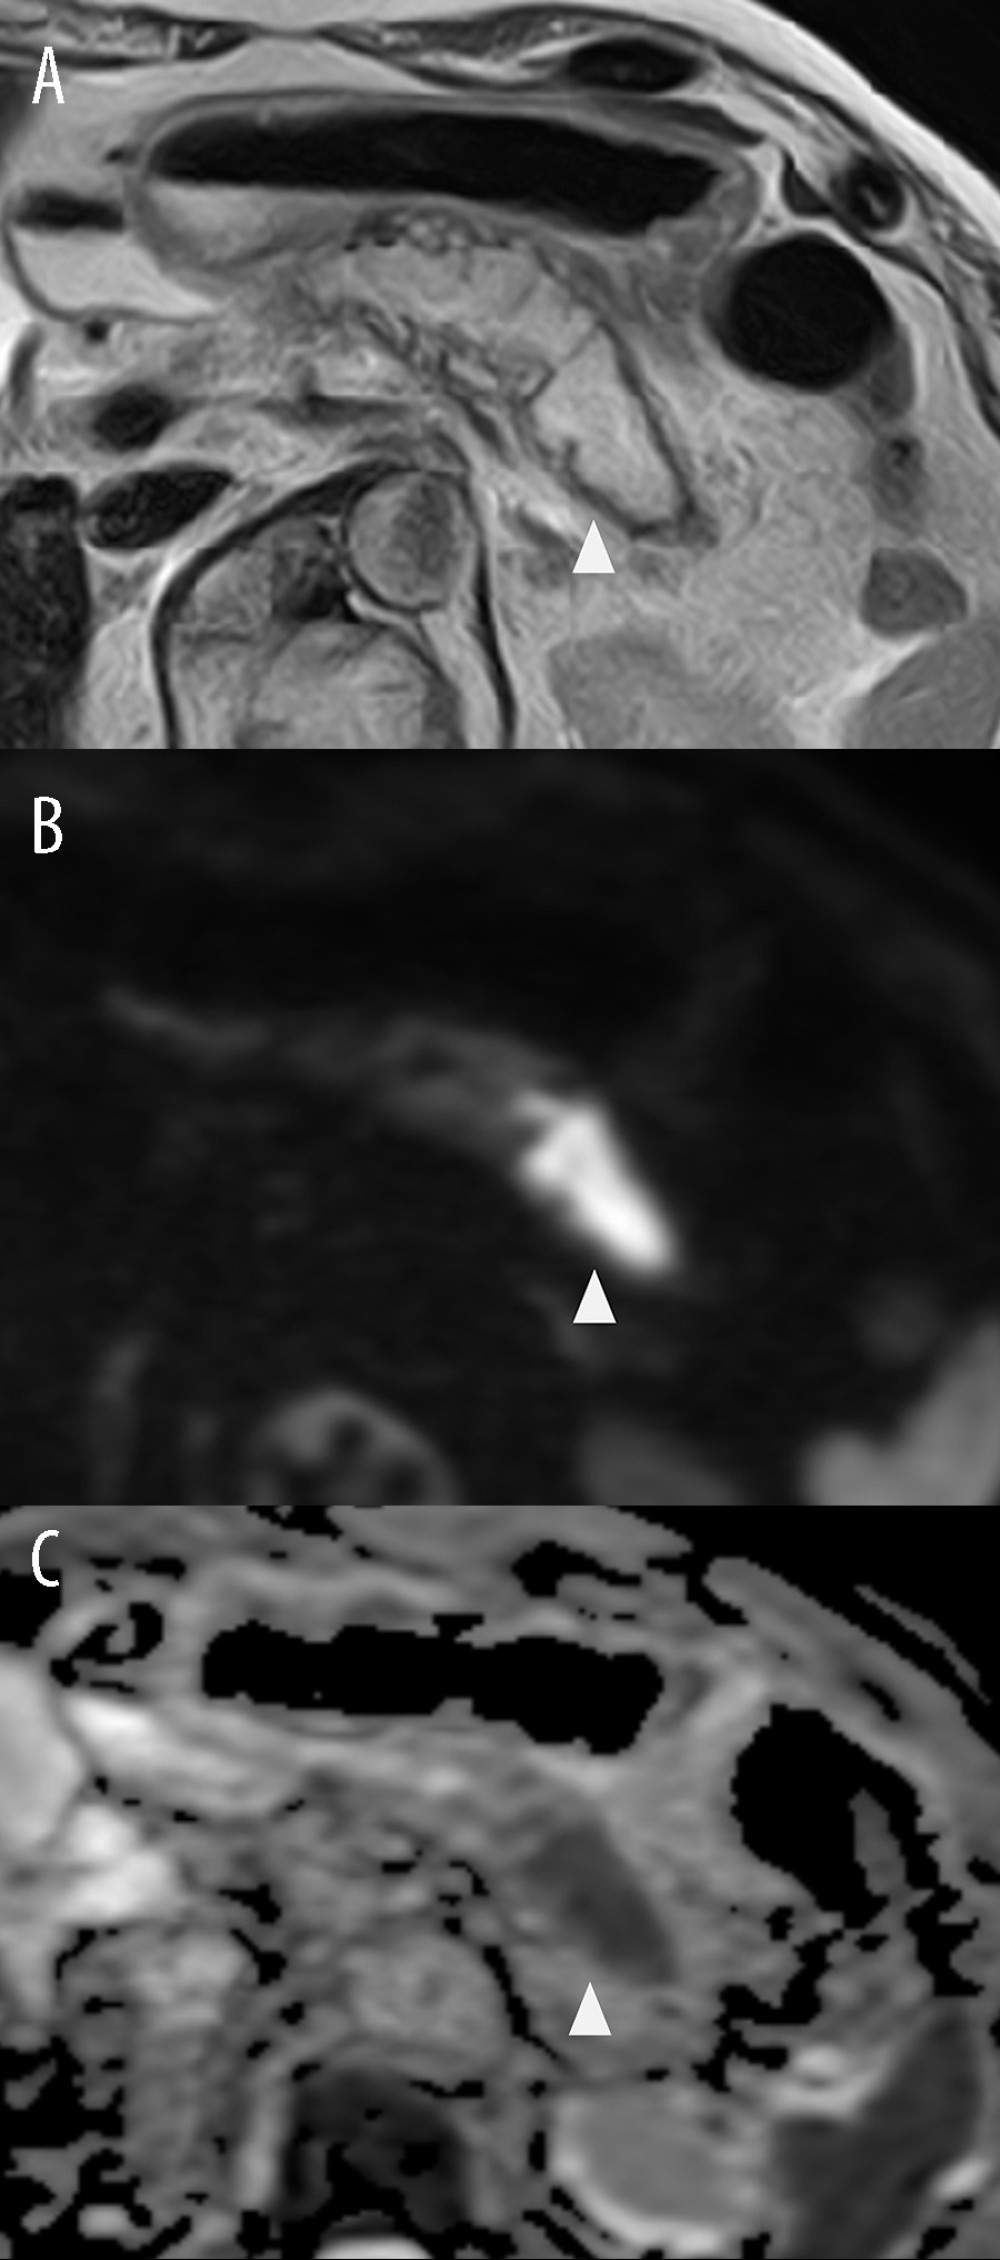 Magnetic resonance imaging (pancreatic body and tail). The main pancreatic duct (MPD) dilation with a maximum diameter of 16 mm in the pancreatic body and tail was detected on (A) T2-wighted image, and the inside of the delated MPD in the pancreatic tail showed a decrease in apparent diffusion coefficient values on diffusion-weighted image (B, C, arrowhead).